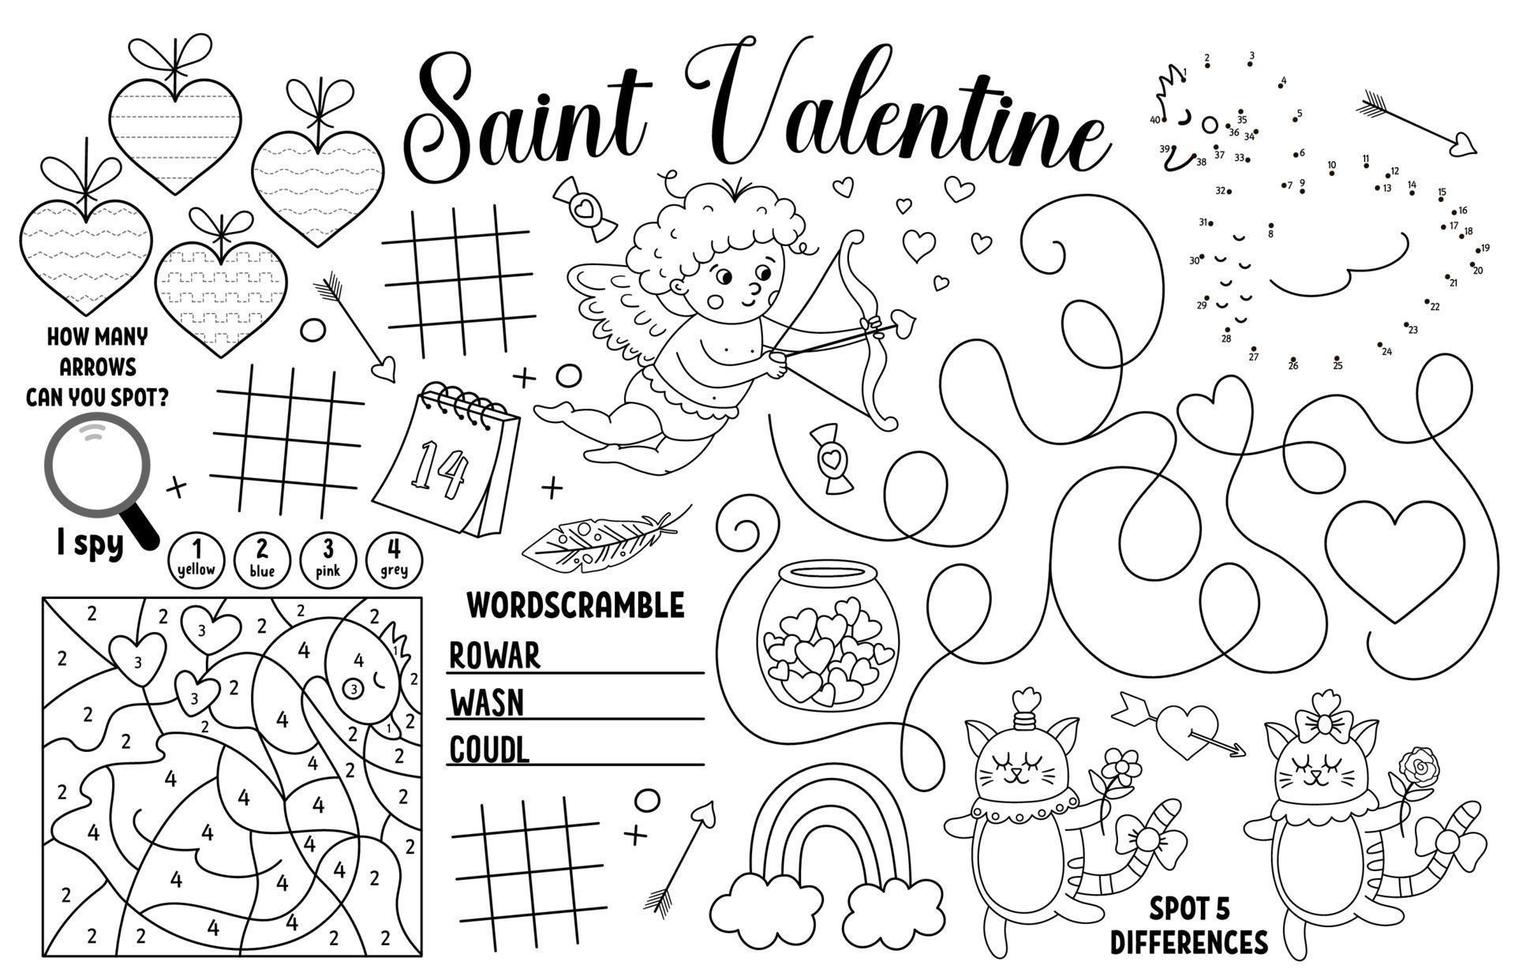 Vector Saint Valentine placemat for kids. Love holiday printable activity mat with maze, tic tac toe charts, connect the dots, find difference. Black and white play mat or coloring page